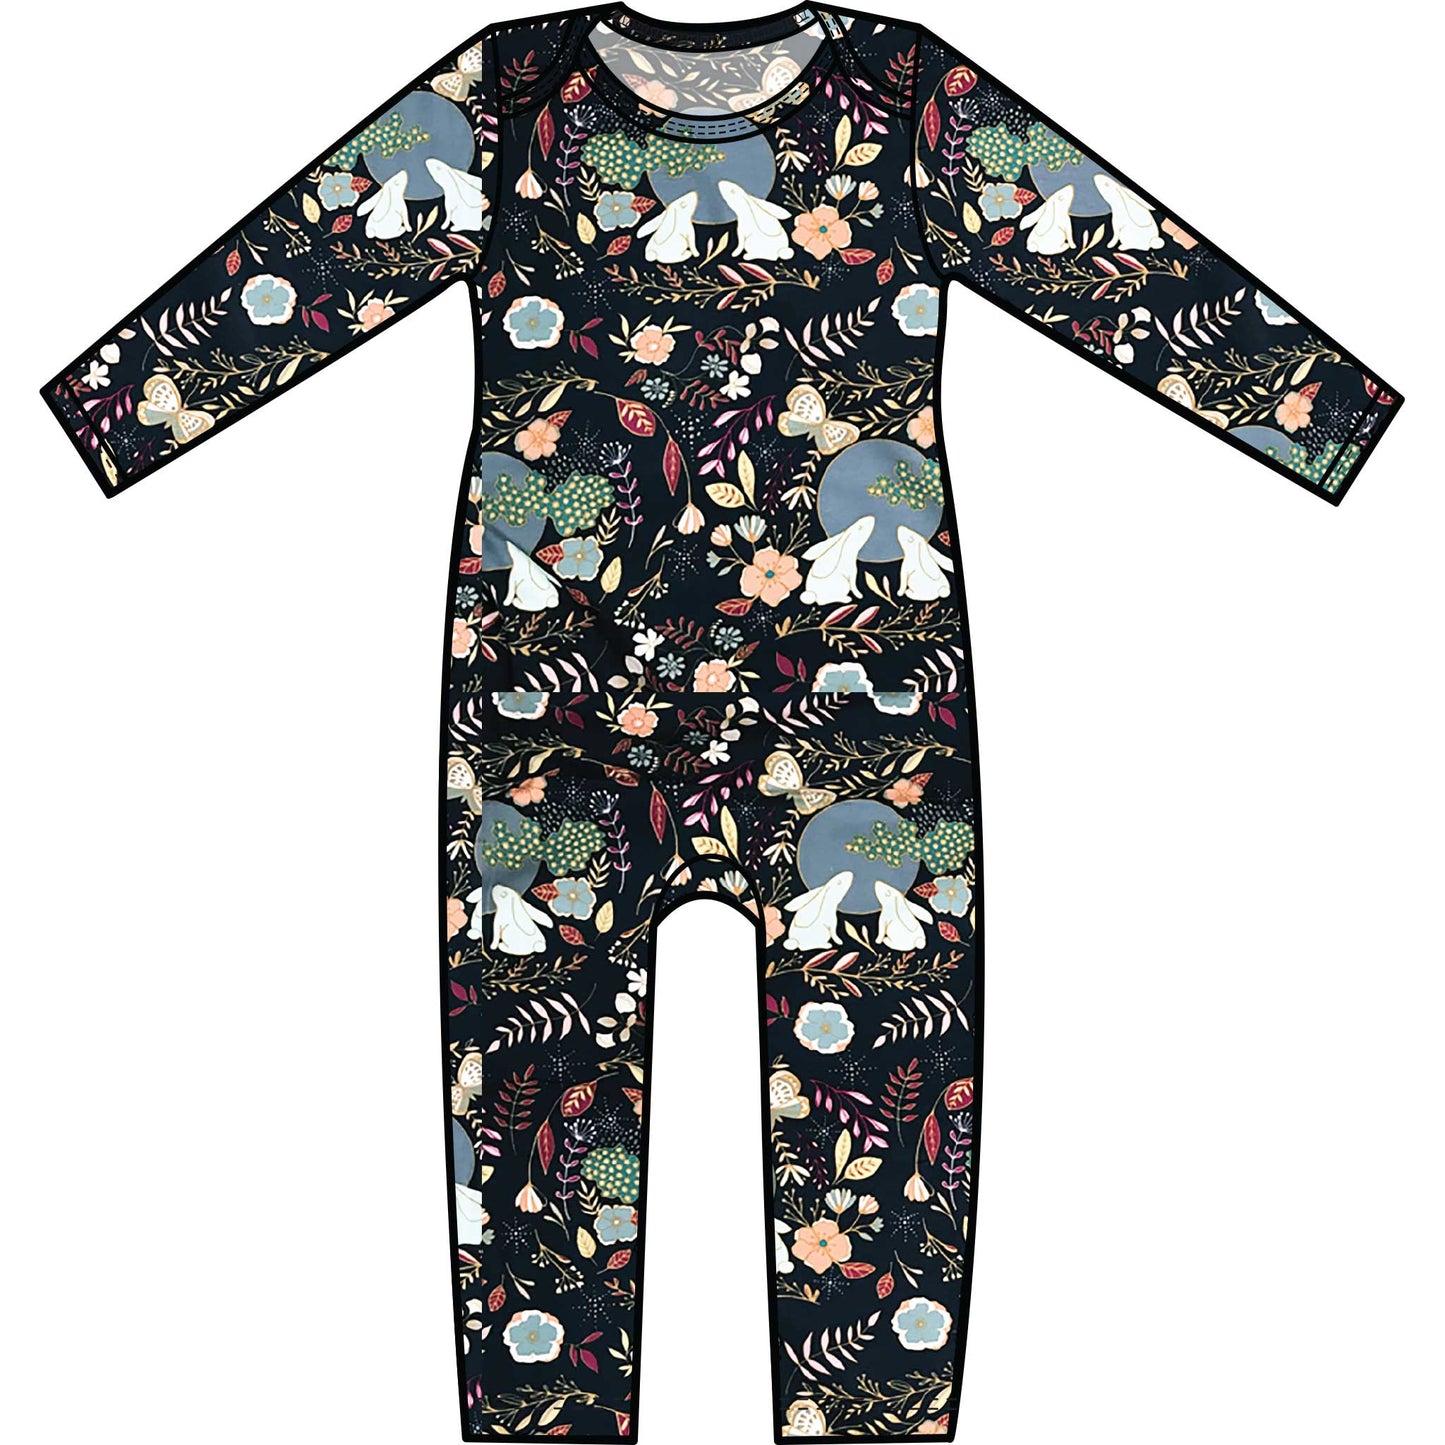 Mod Union™ Infant Long Sleeved Baby Union Suit | Various Fun Cotton Knit Prints-Baby One-Pieces-3-6 months-Sparks Moonlight Rabbits-Hagsters